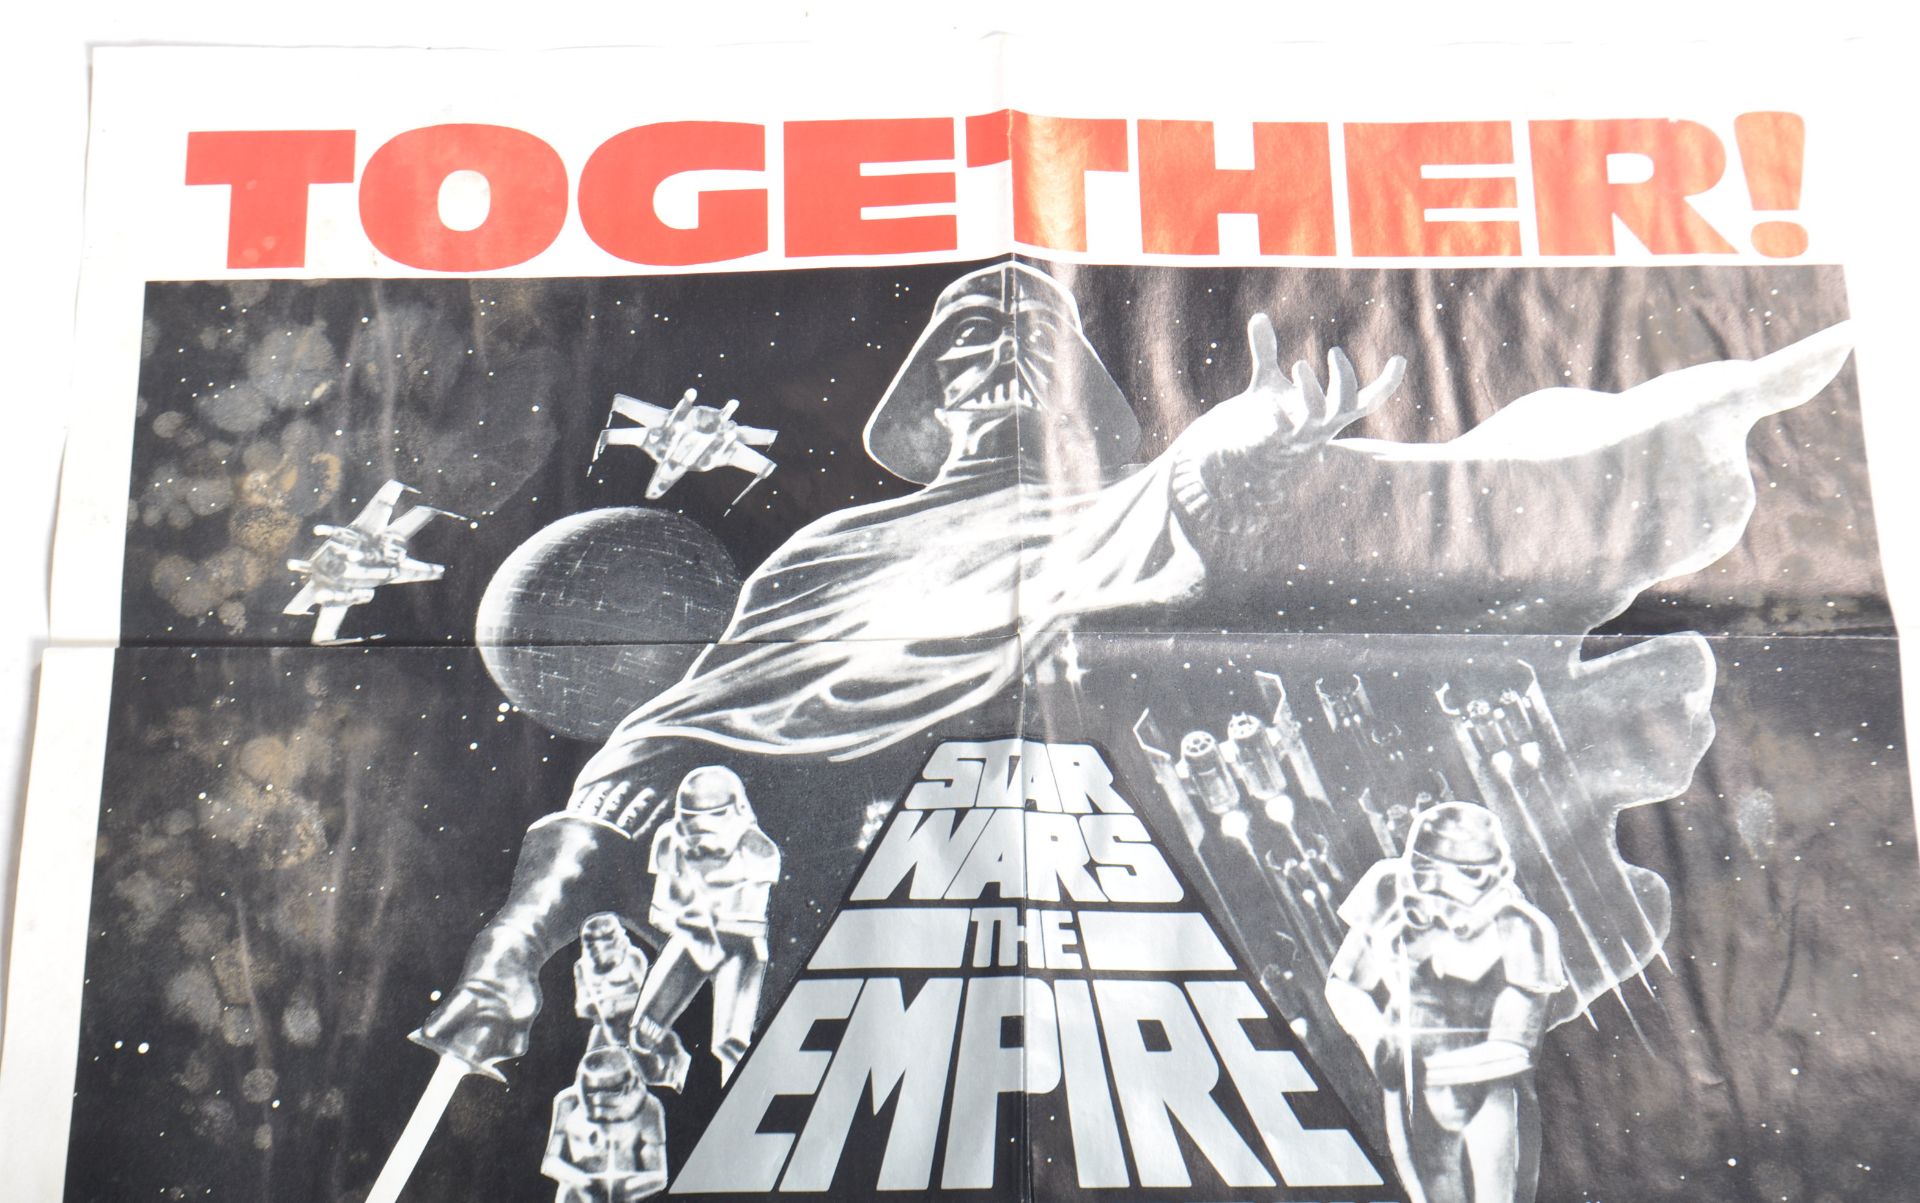 ESTATE OF DAVE PROWSE - RARE AUSTRALIAN TRIPLE BILL POSTER - Image 2 of 5